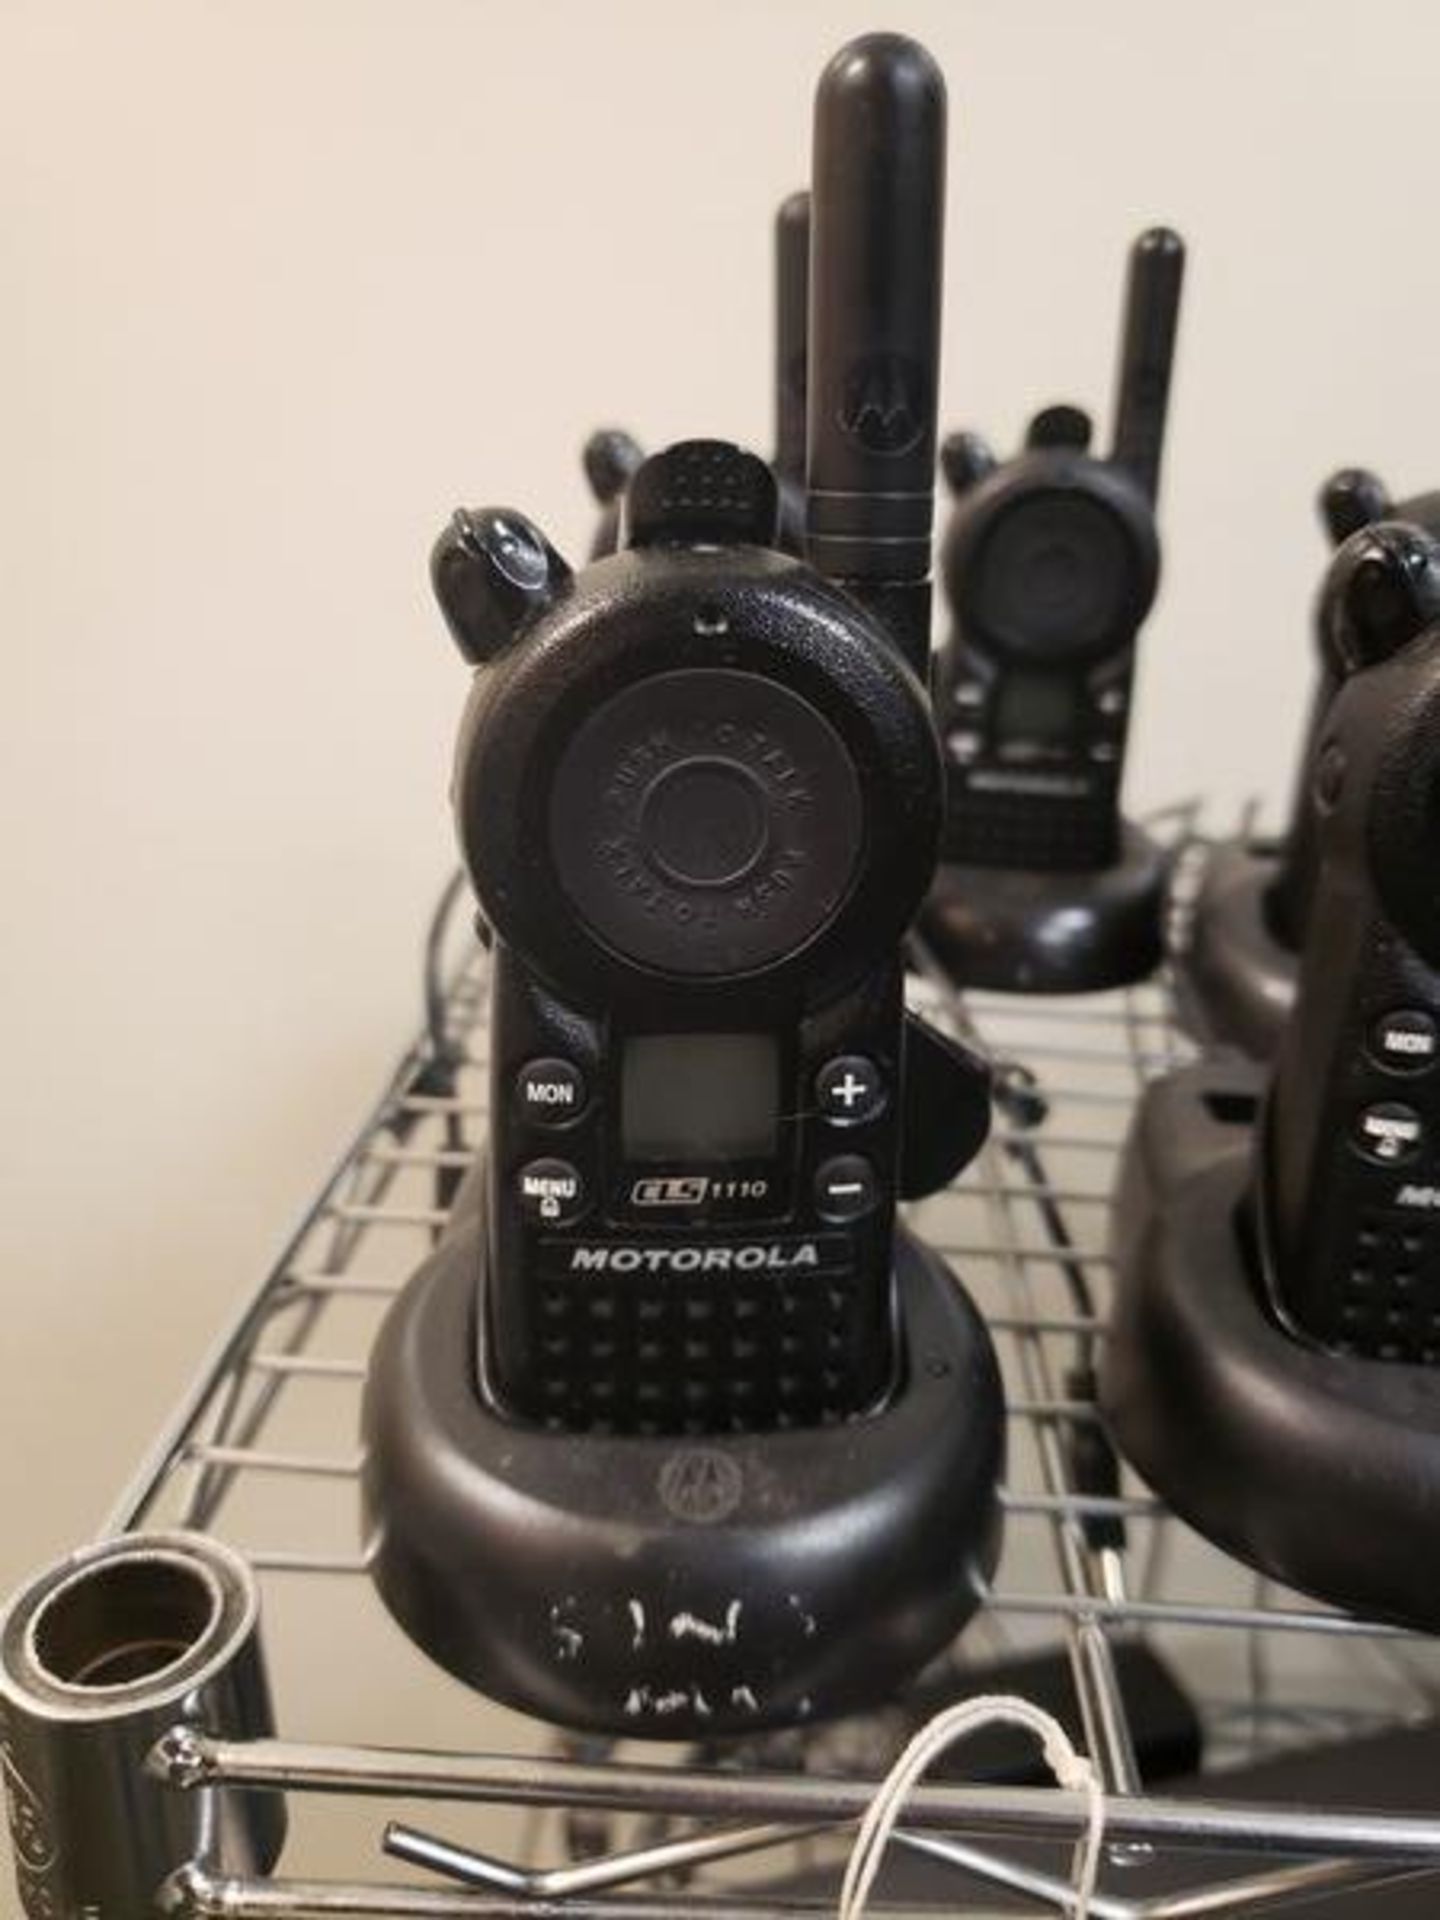 (x14) MOTOROLA WALKIE TALKIES WITH CHARGING STANDS AND CORDS - Image 2 of 4